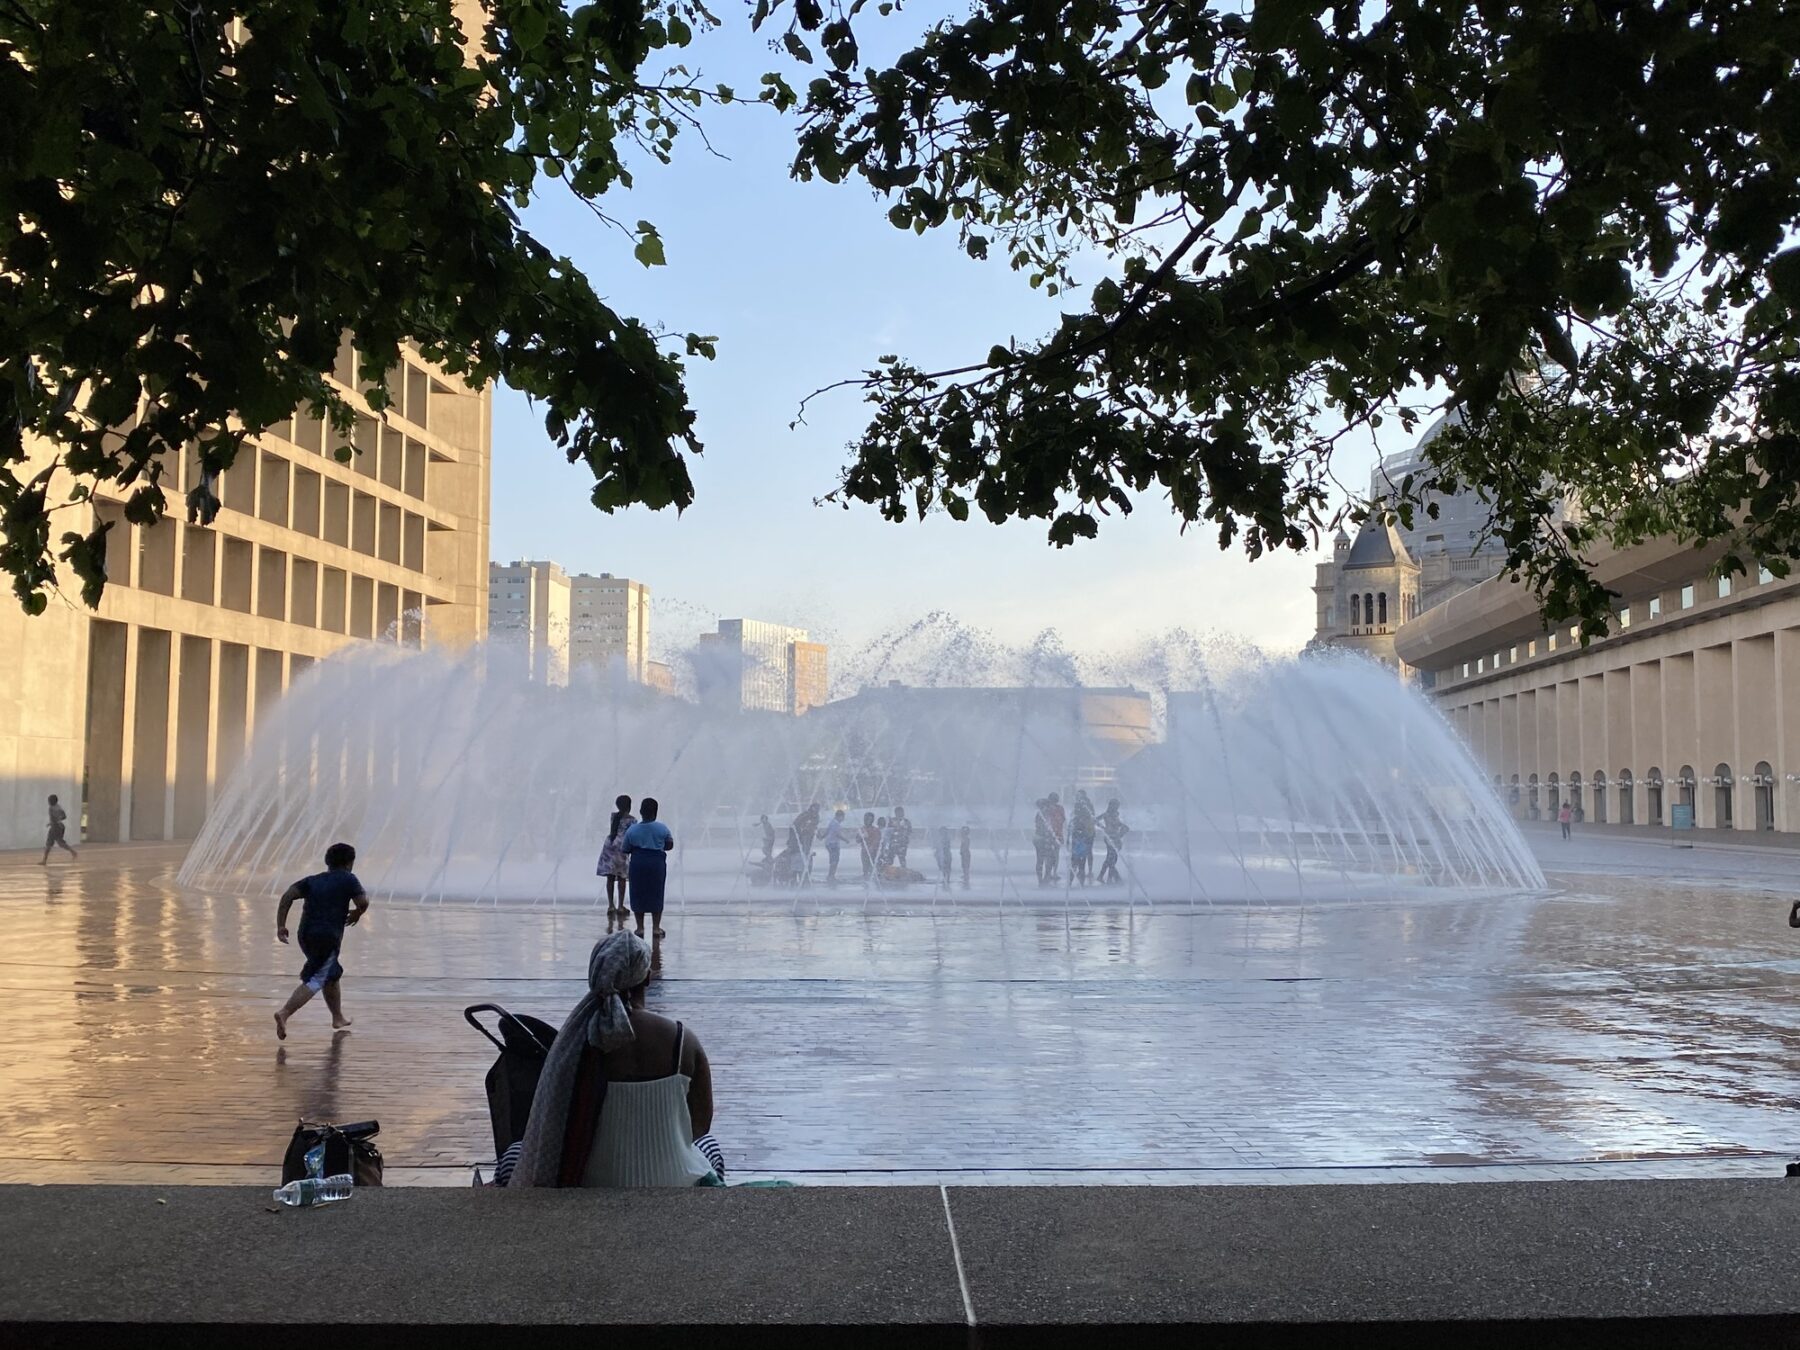 photograph of circular fountain with visitors splashing in the water